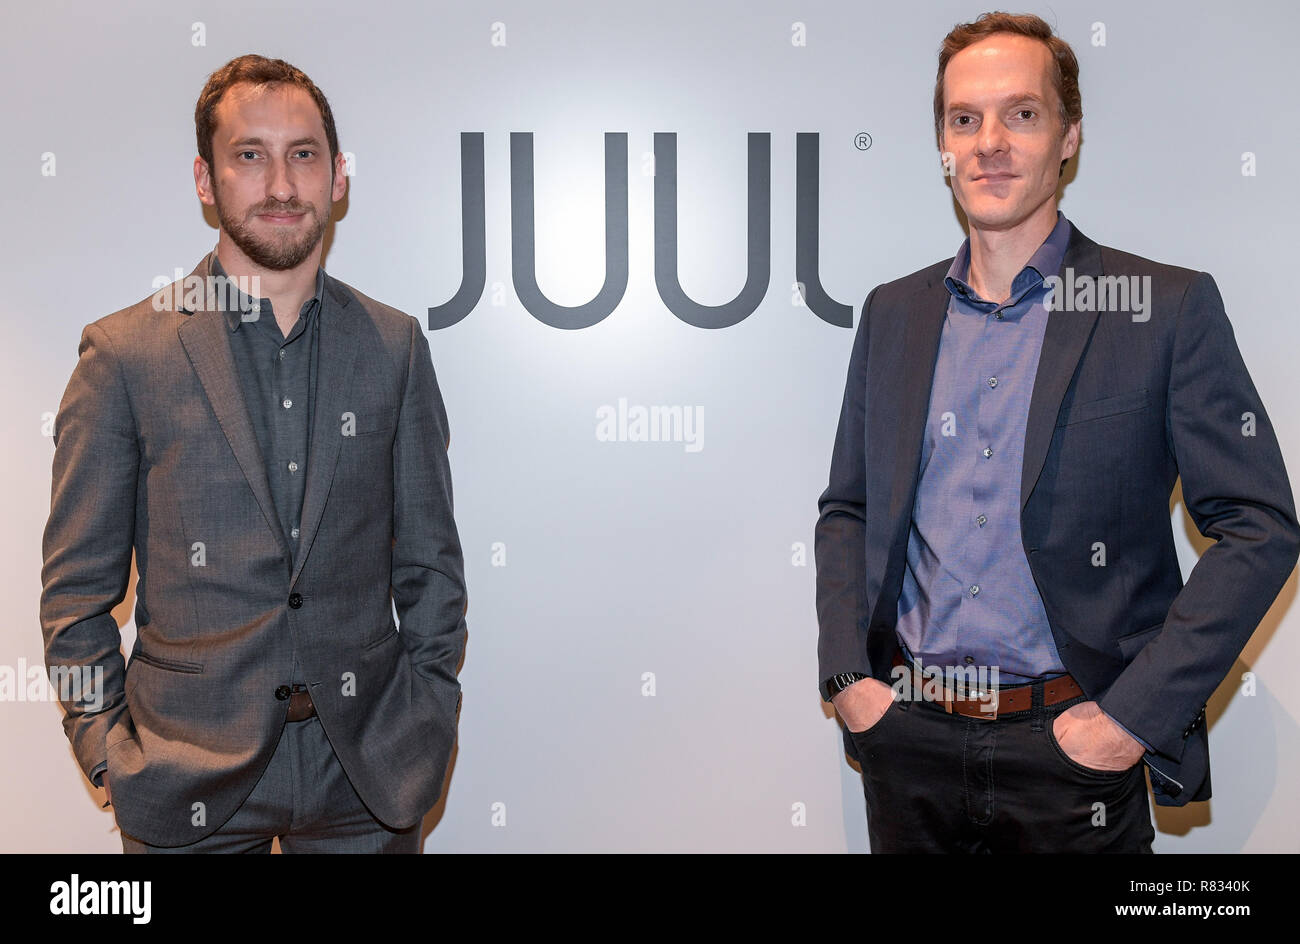 Hamburg, Germany. 12th Dec, 2018. James Monsees (l) and Adam Bowen, founder  of the e-cigarette manufacturer "Juul", look into the photographer's camera  at the Hotel Tortue. "Juul" is the market leader for